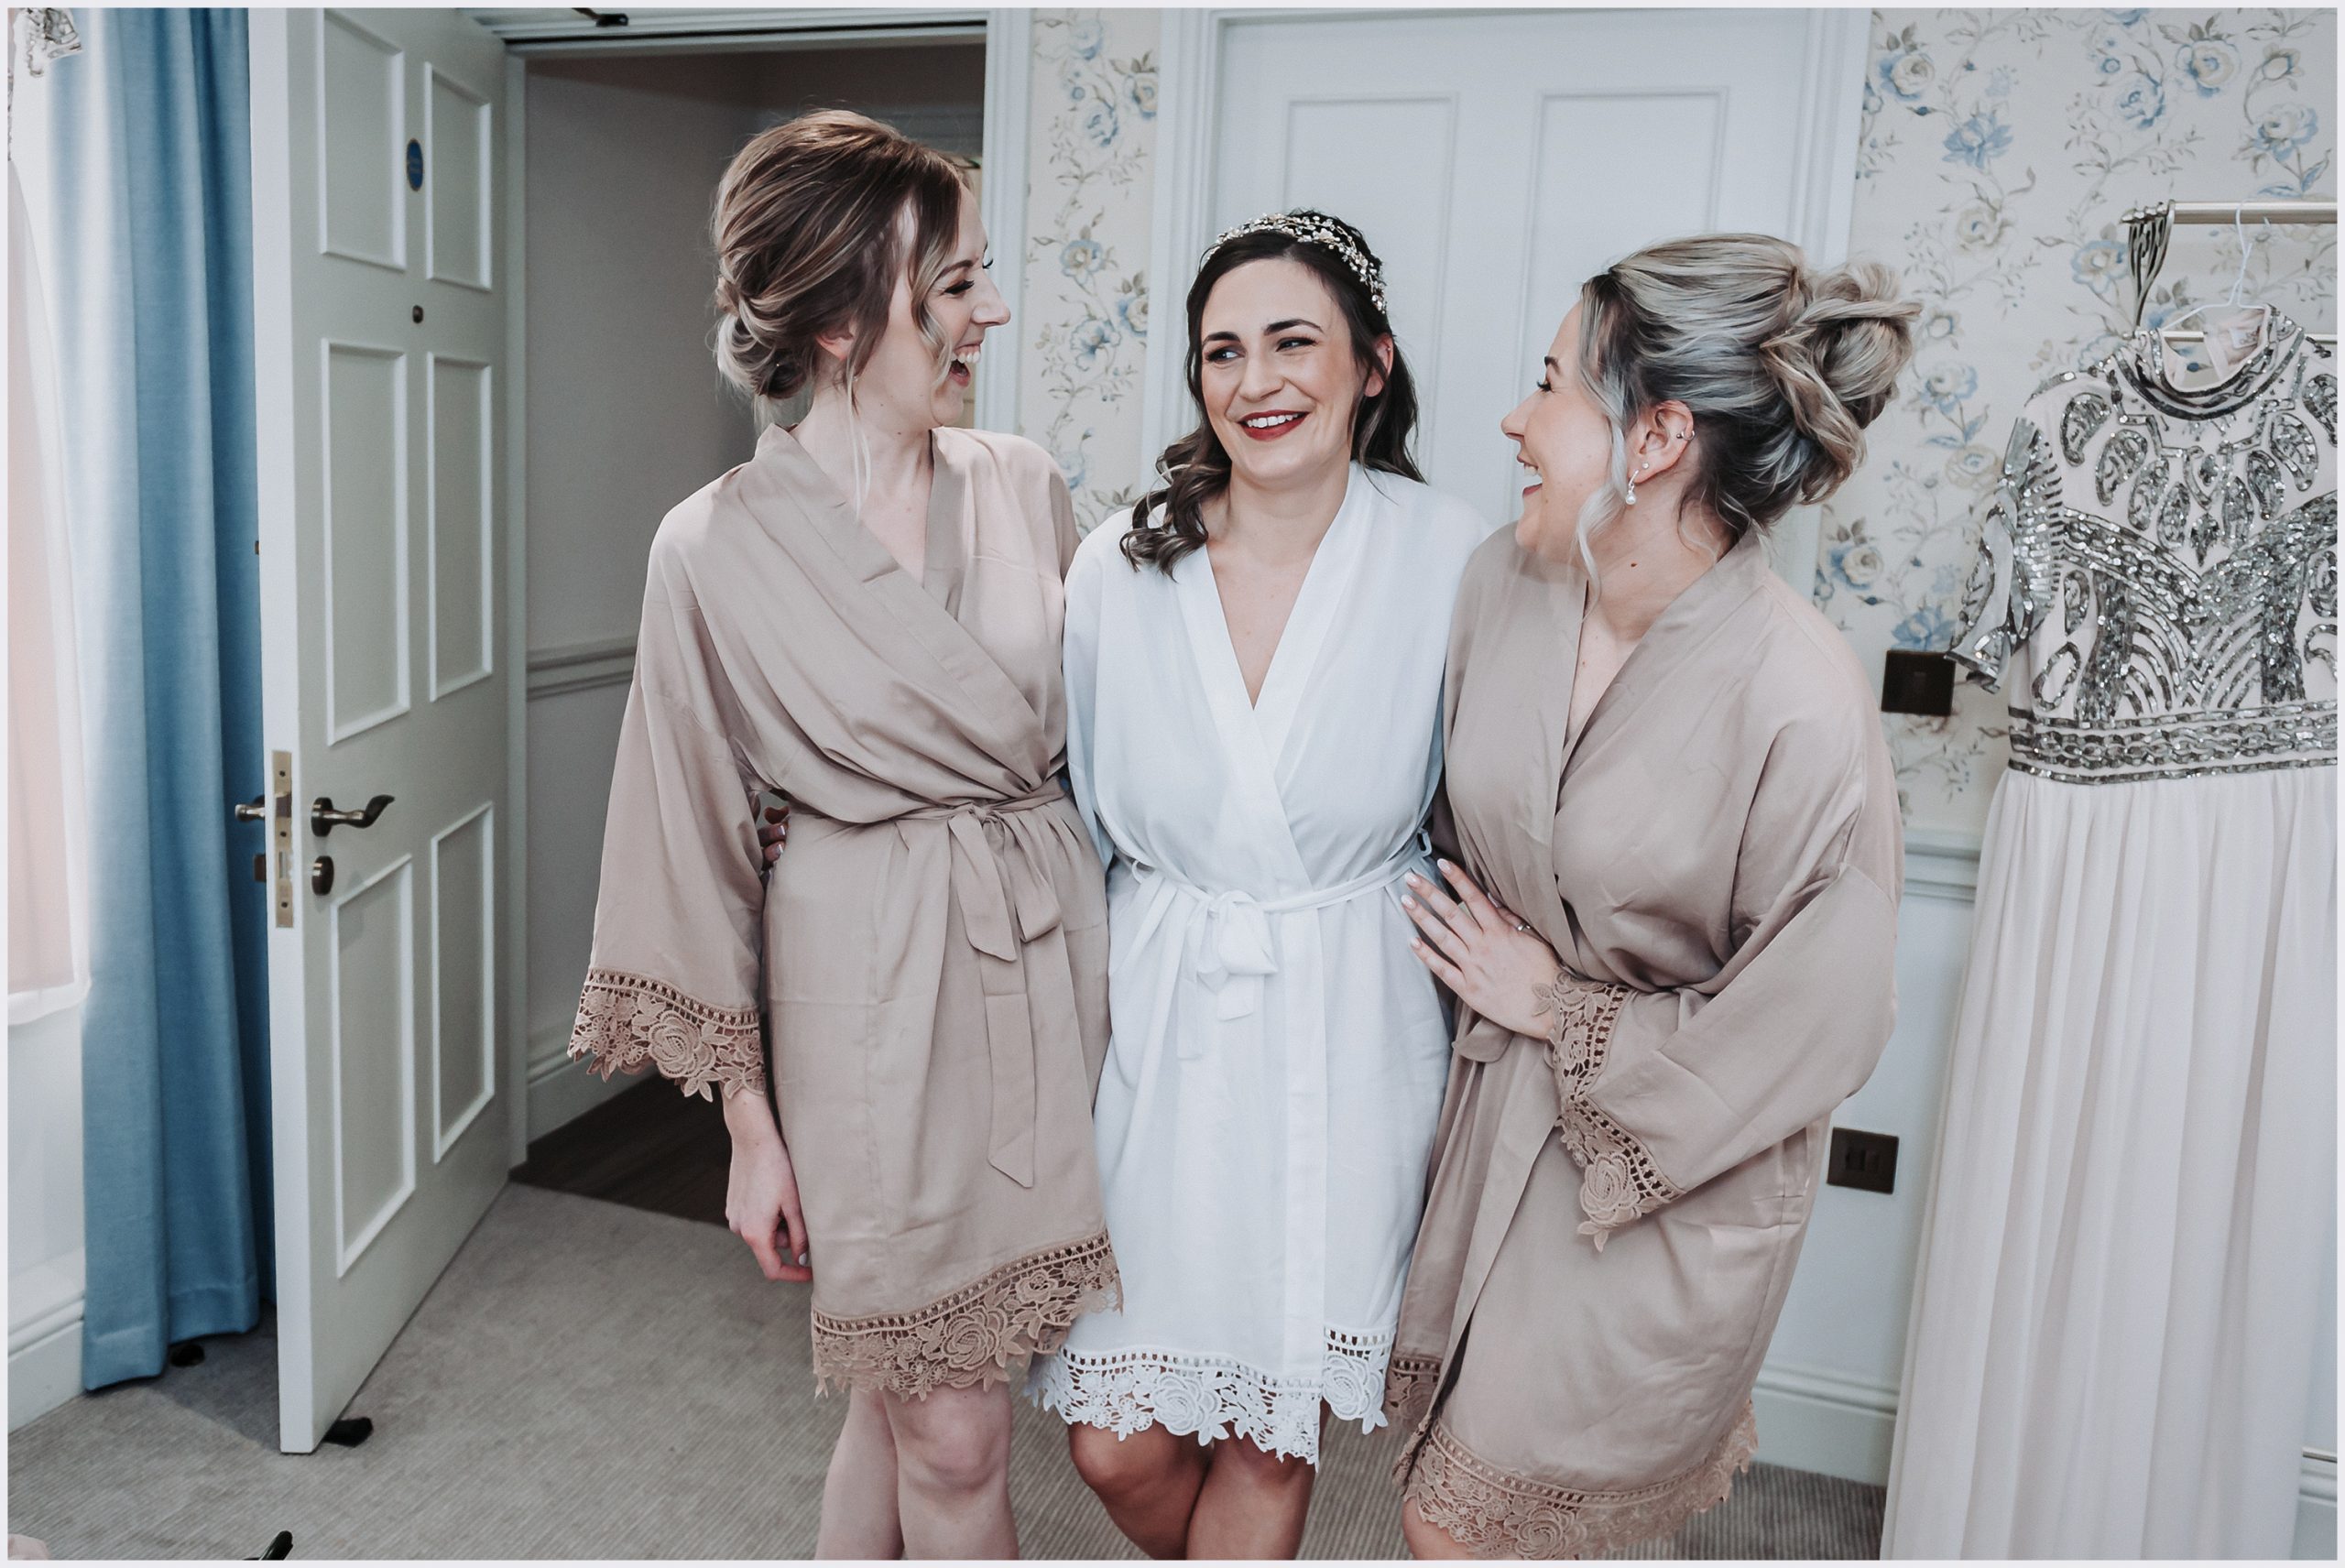 Three bridesmaids with their arms around each other share a joke in the gorgeous dressing room at Old Bishop's Palace in Chester, an exclusive wedding venue.  Image captured by Helena Jayne Photography a north Wales based photographer